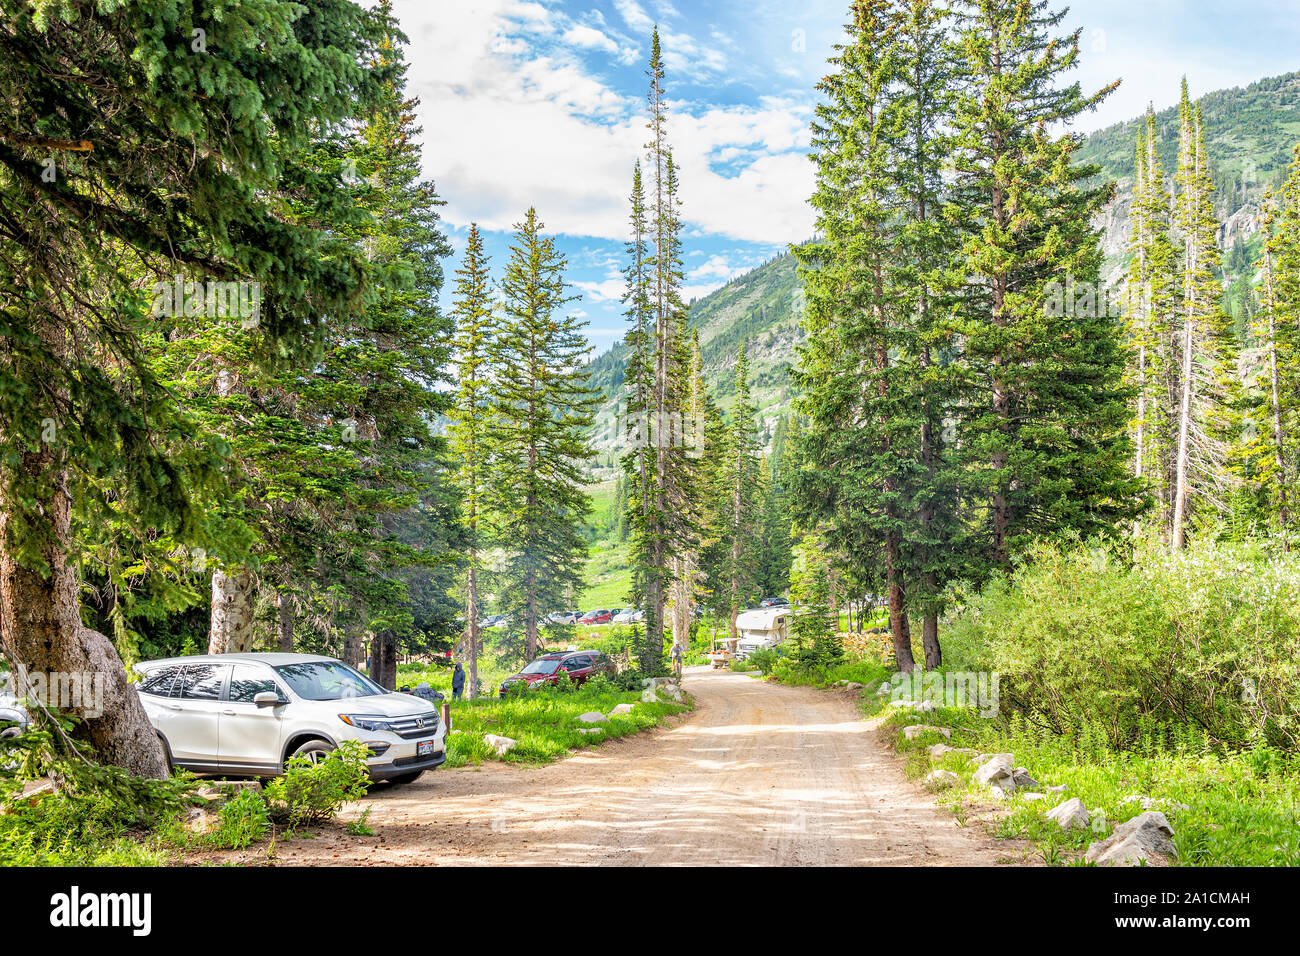 Alta, USA - July 25, 2019: Campsites with cars and dirt road in Albion Basin, Utah summer in Wasatch mountains with nobody Stock Photo